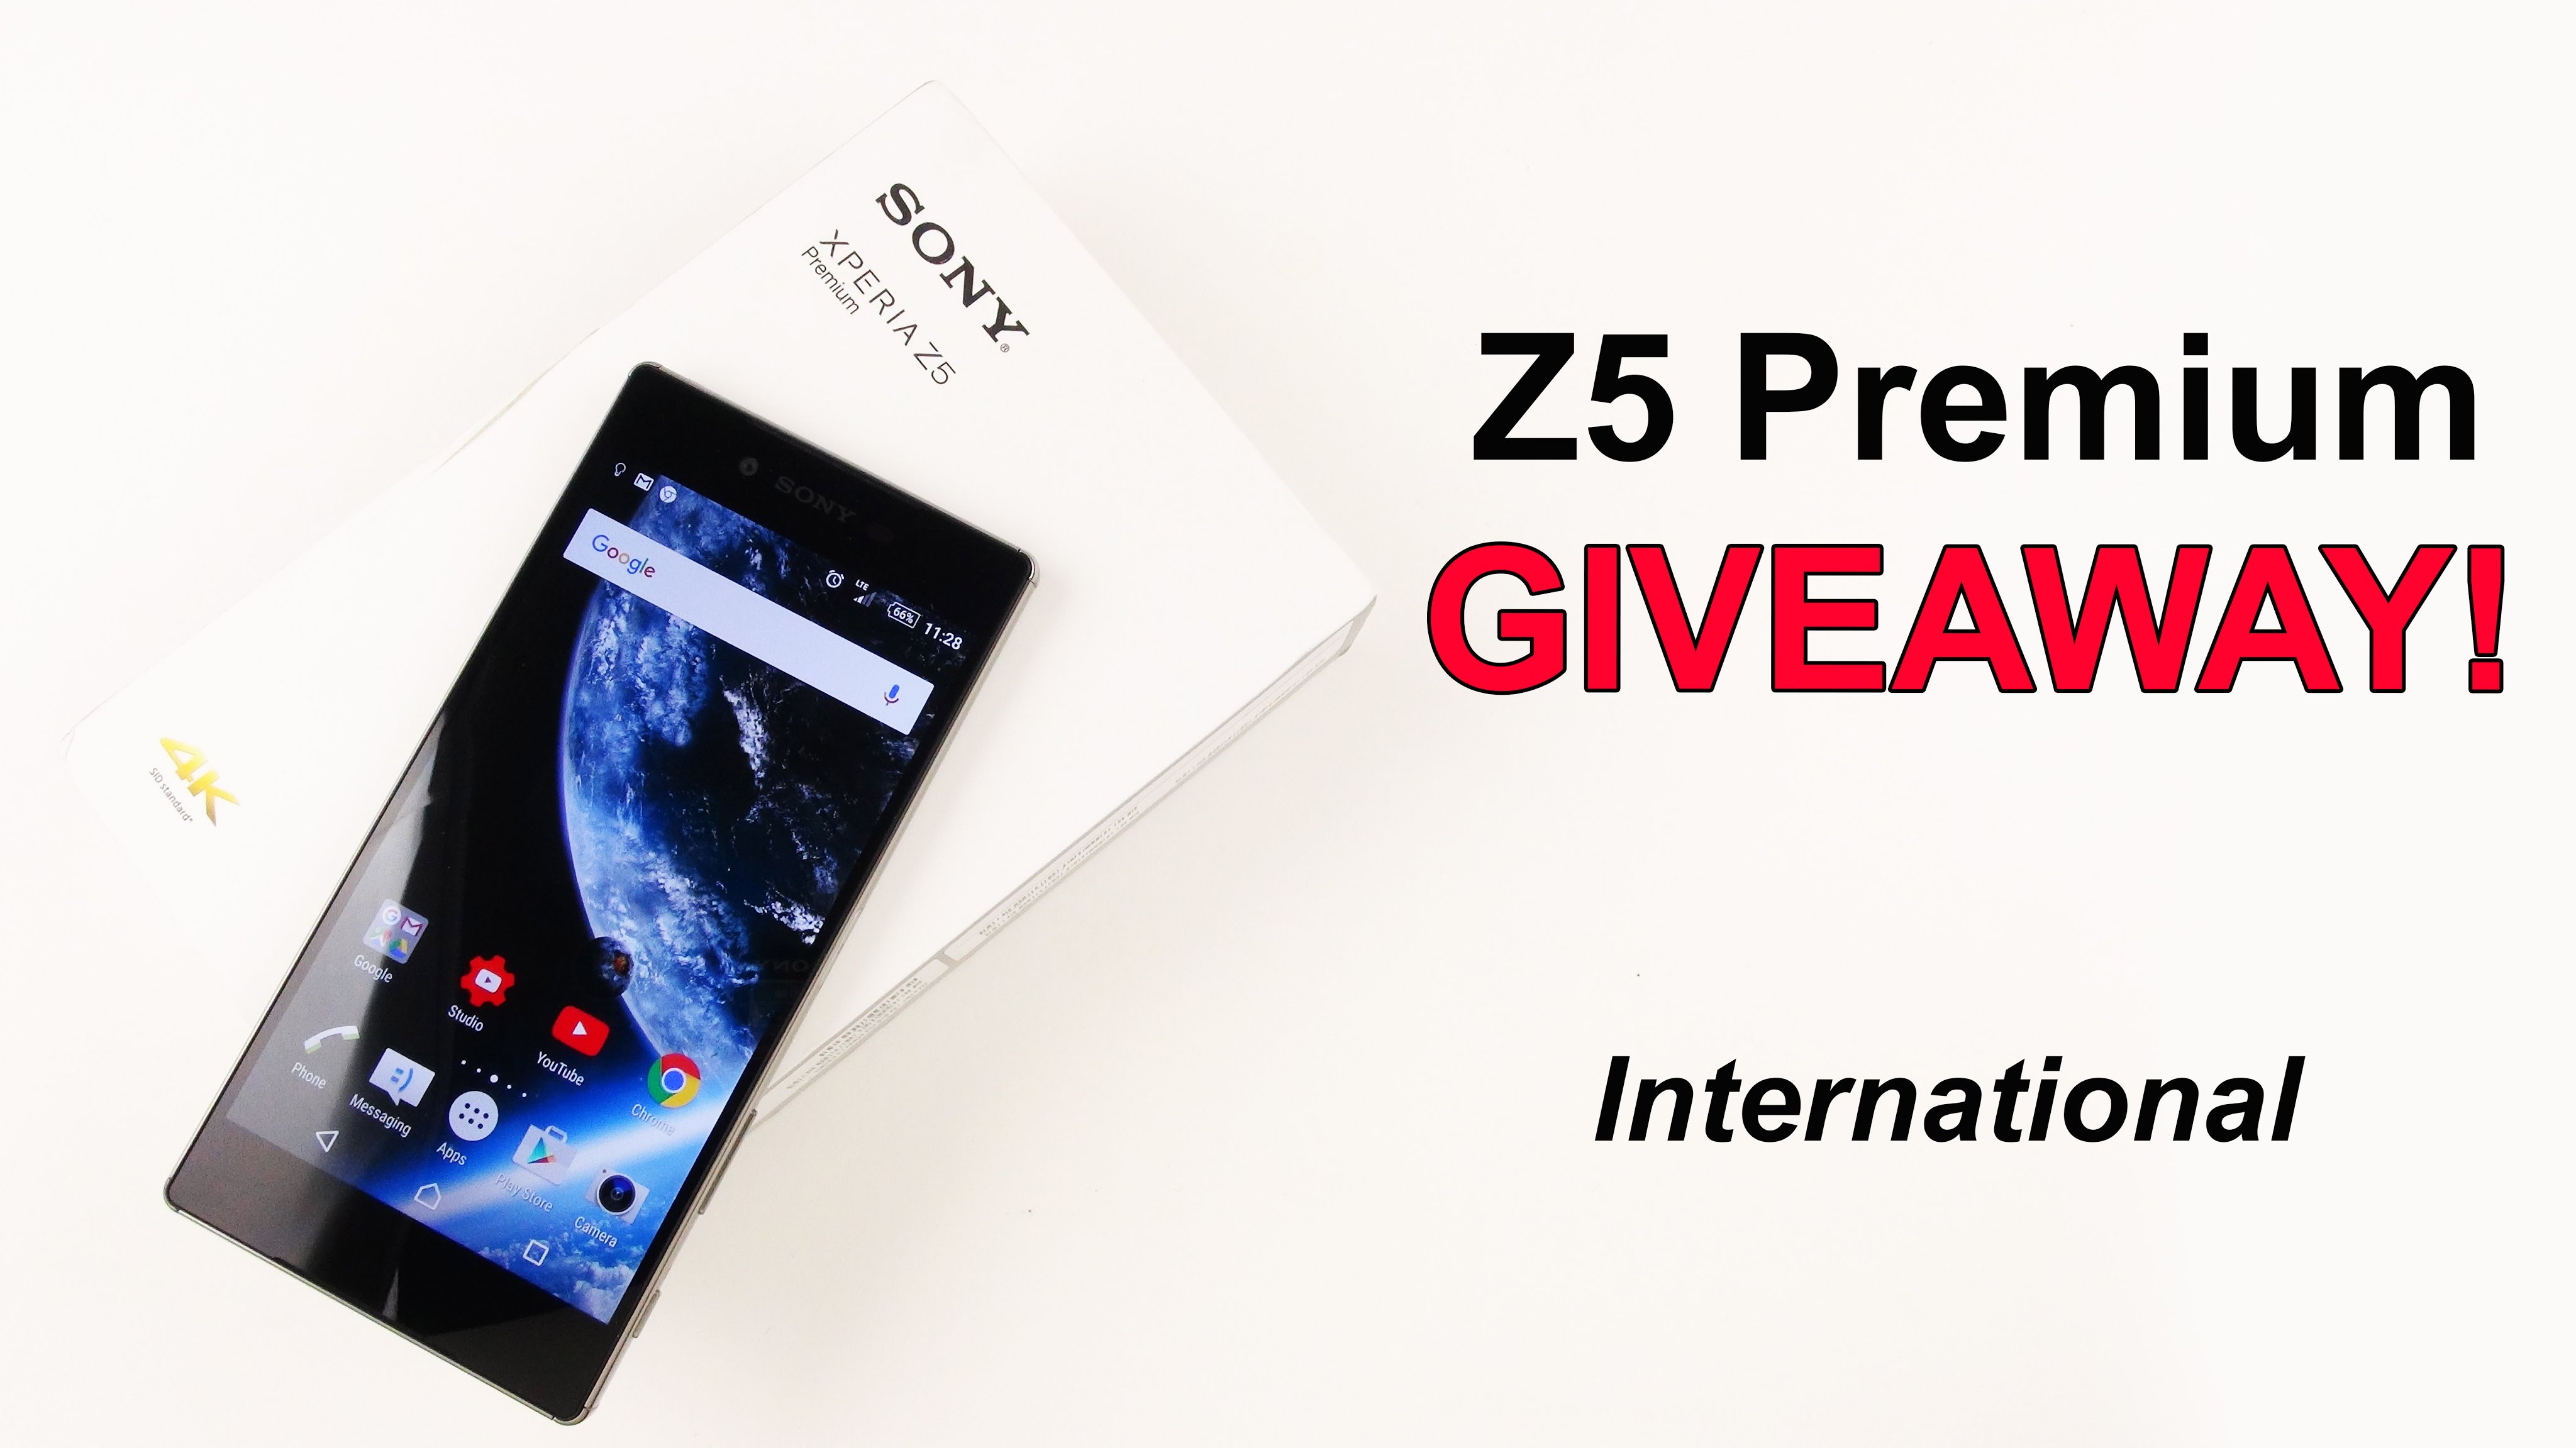 Xperia Z5 Premium Giveaway & Heading to MWC 2016 (CLOSED)